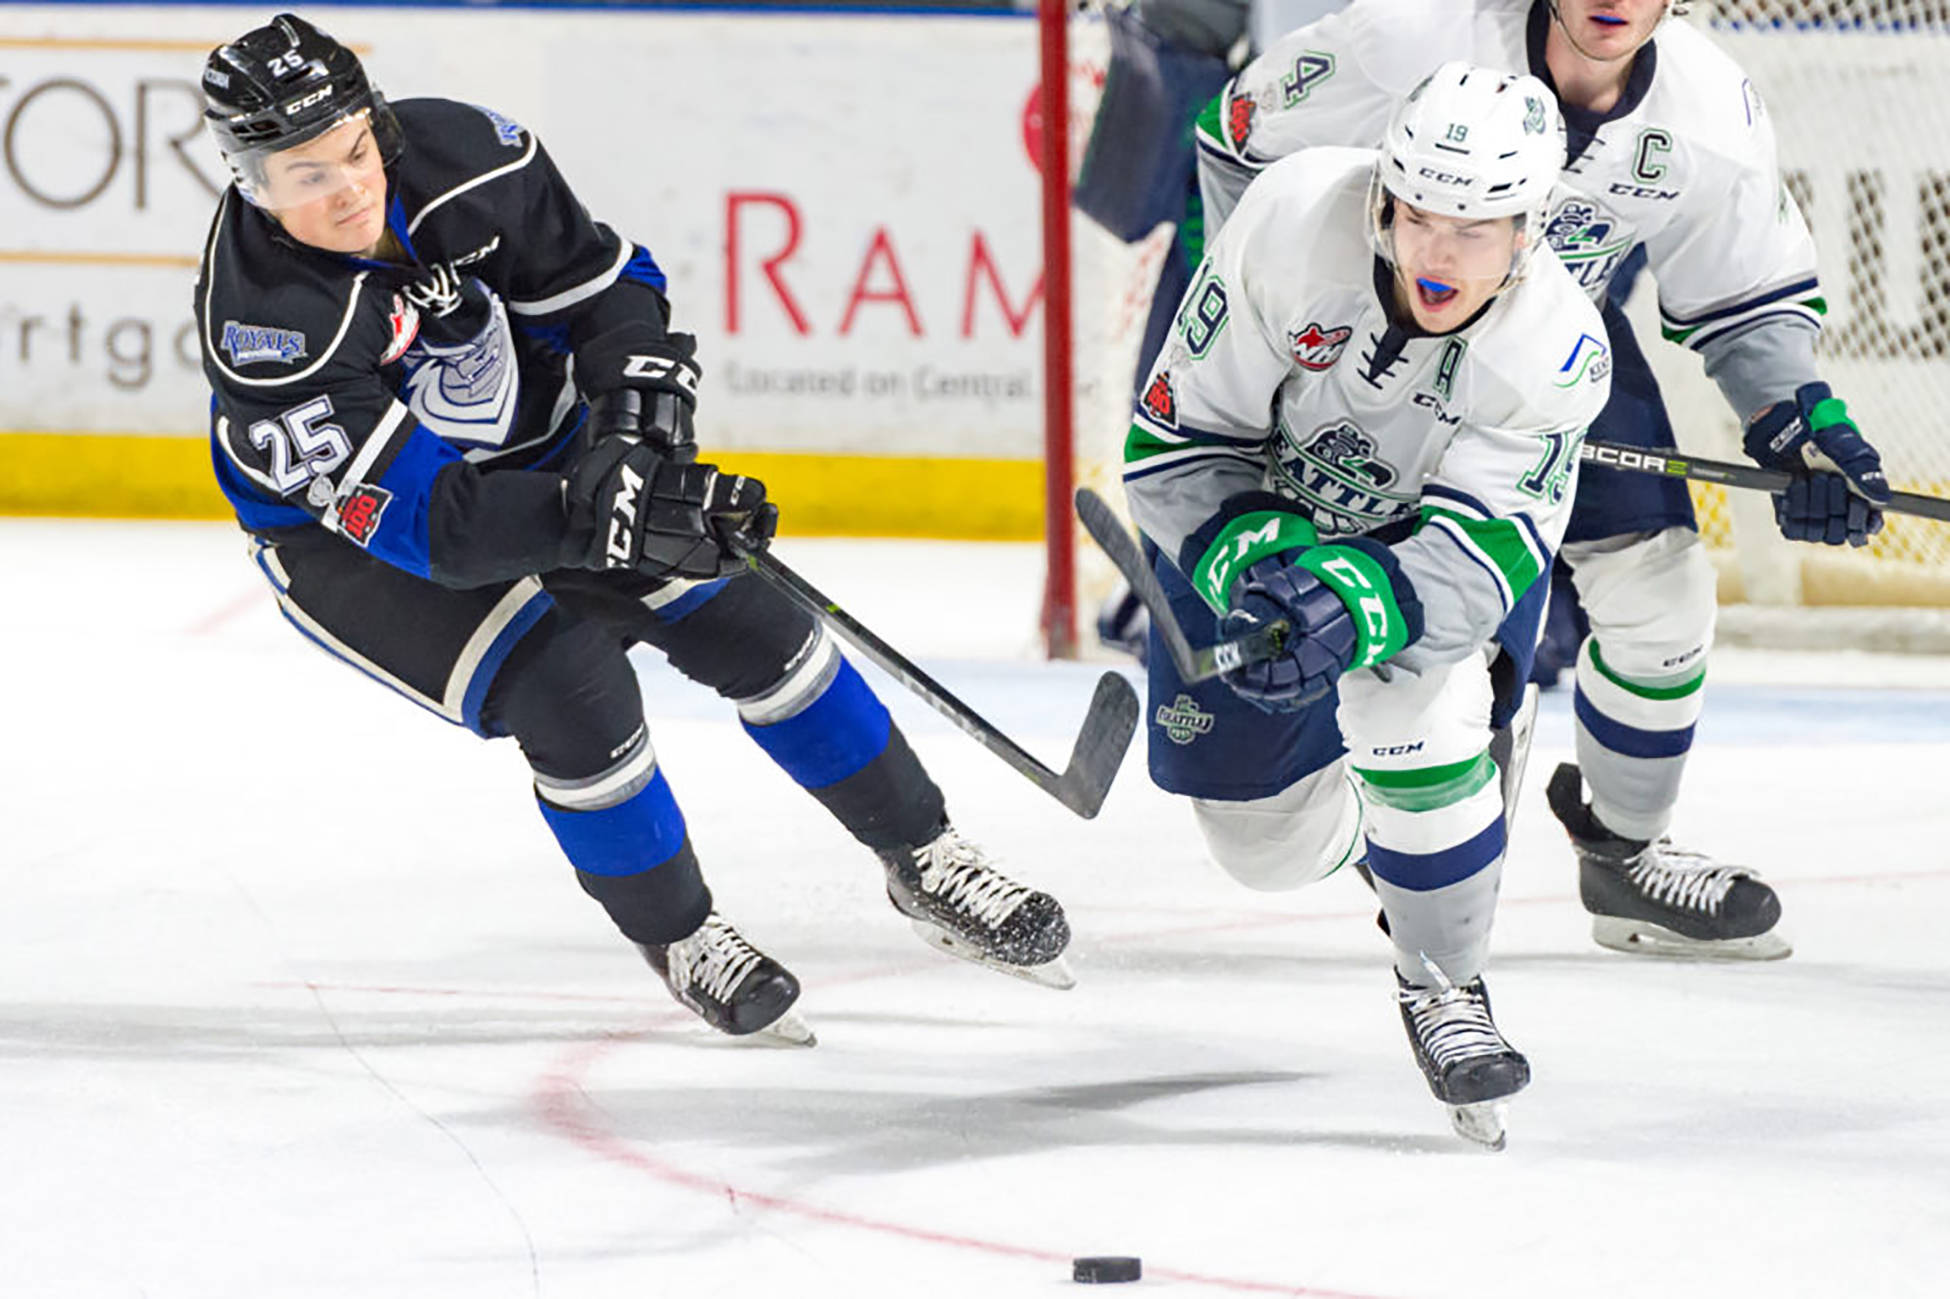 The Thunderbirds’ Donovan Neuls pushes the puck up the ice with the Royals’ Dino Kambeitz in pursuit during WHL play Saturday night. COURTESY PHOTO, Brian Liesse, T-Birds